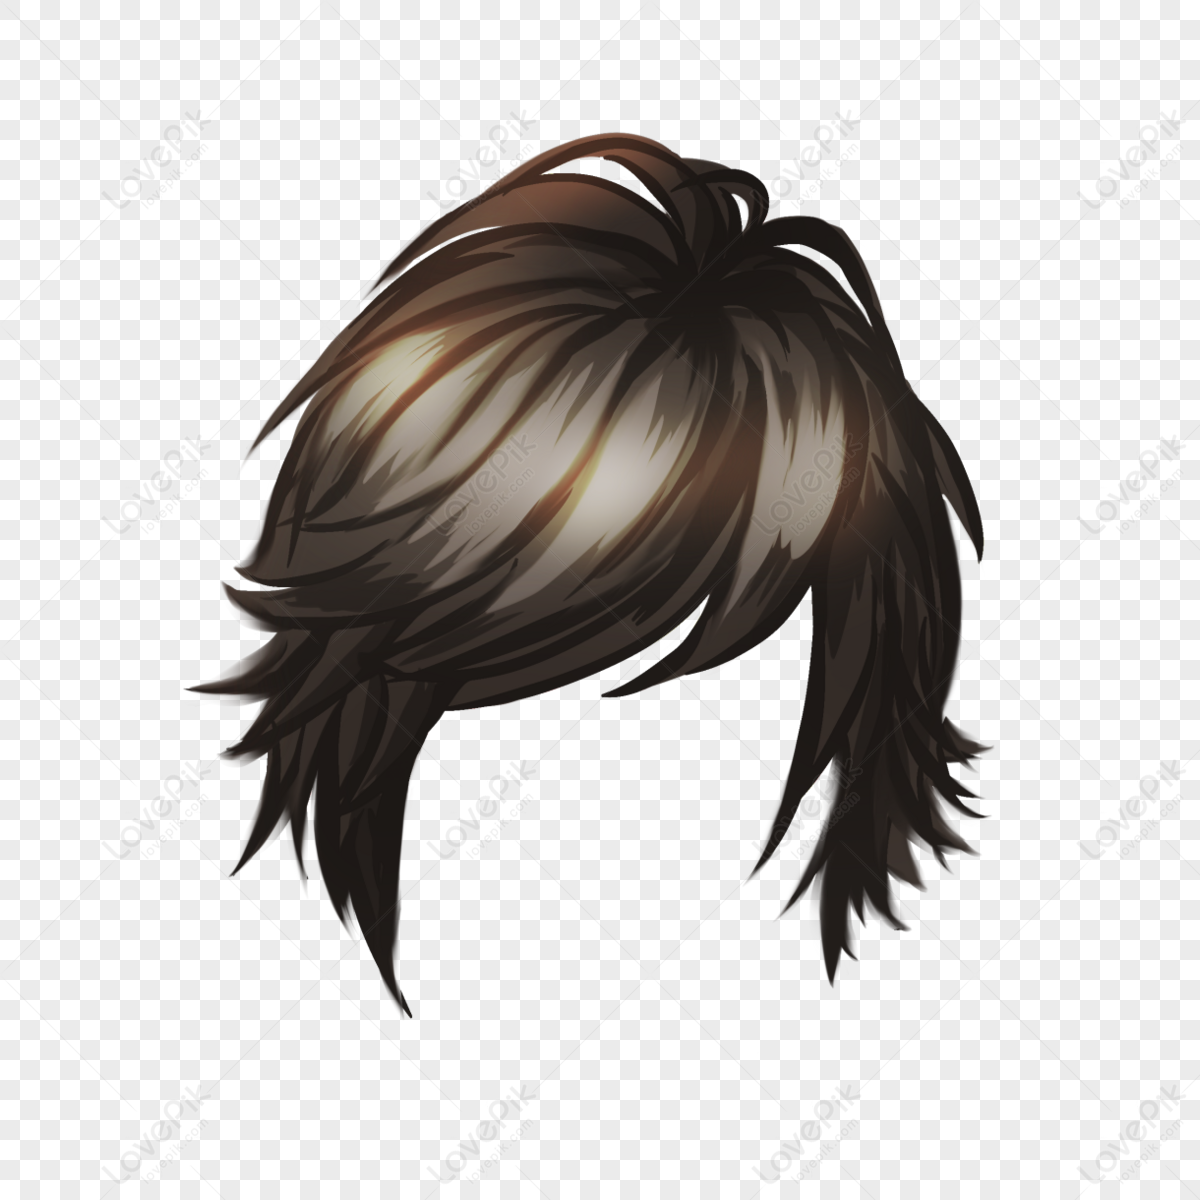 Download HD Hair Hairstyle Haircut Shorthair - Lace Wig Transparent PNG  Image - NicePNG.com